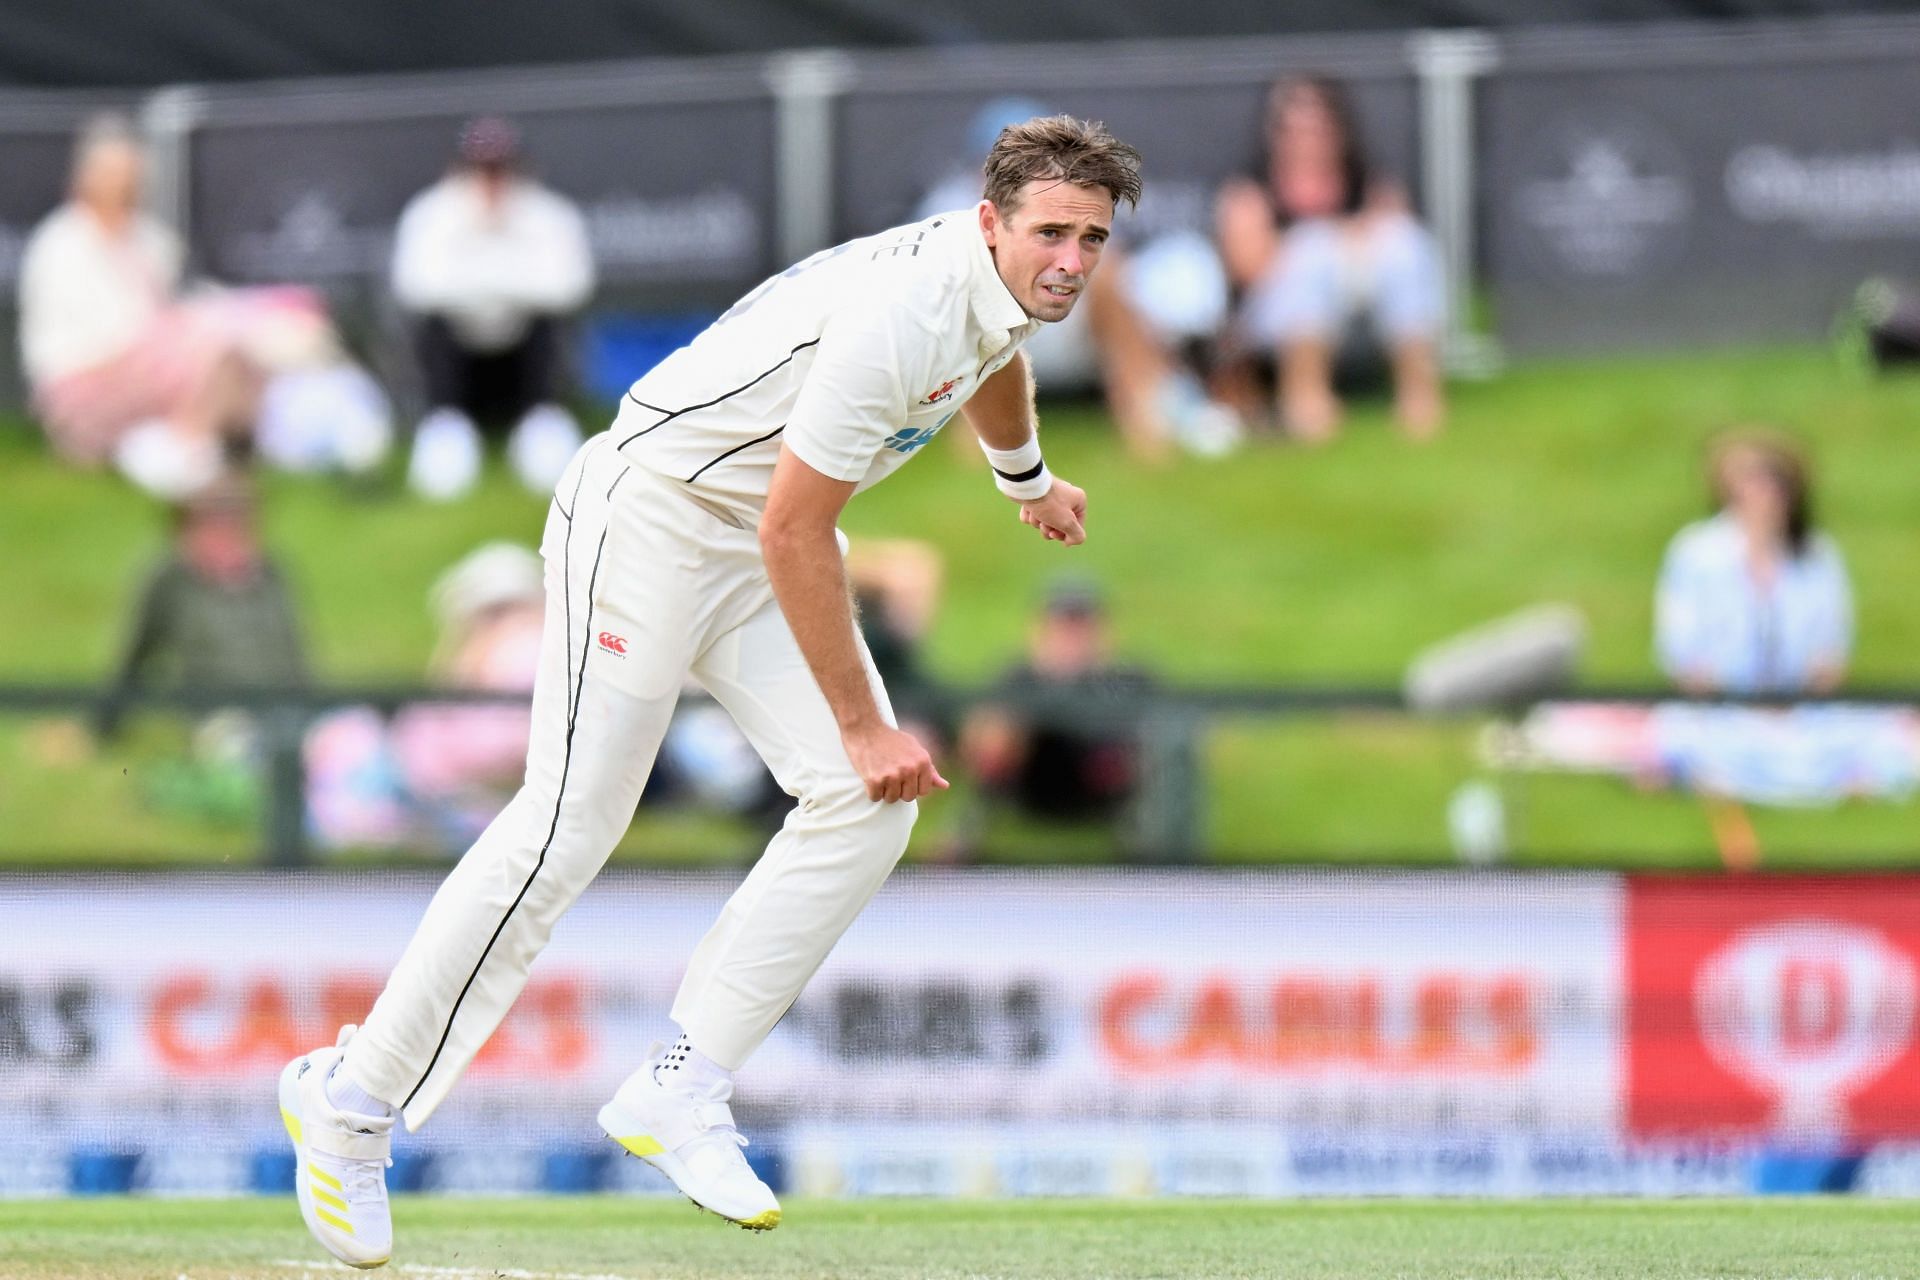 Tim Southee will be a handful on the swing-friendly pitches in New Zealand